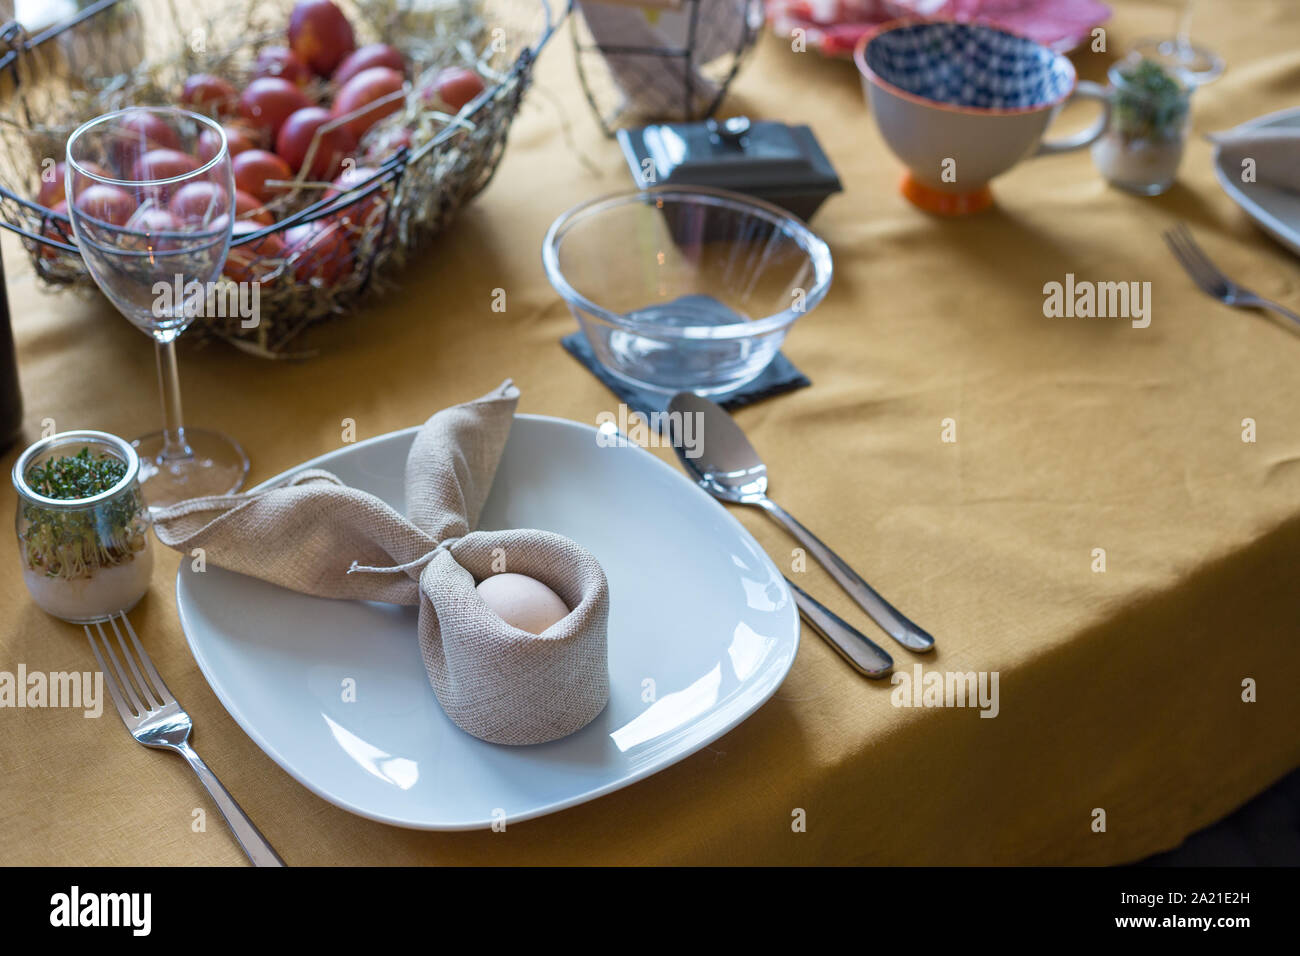 Real family table set for Easter breakfast in traditional Polish home. Basket filled with eggs colored with onion skins. Stock Photo